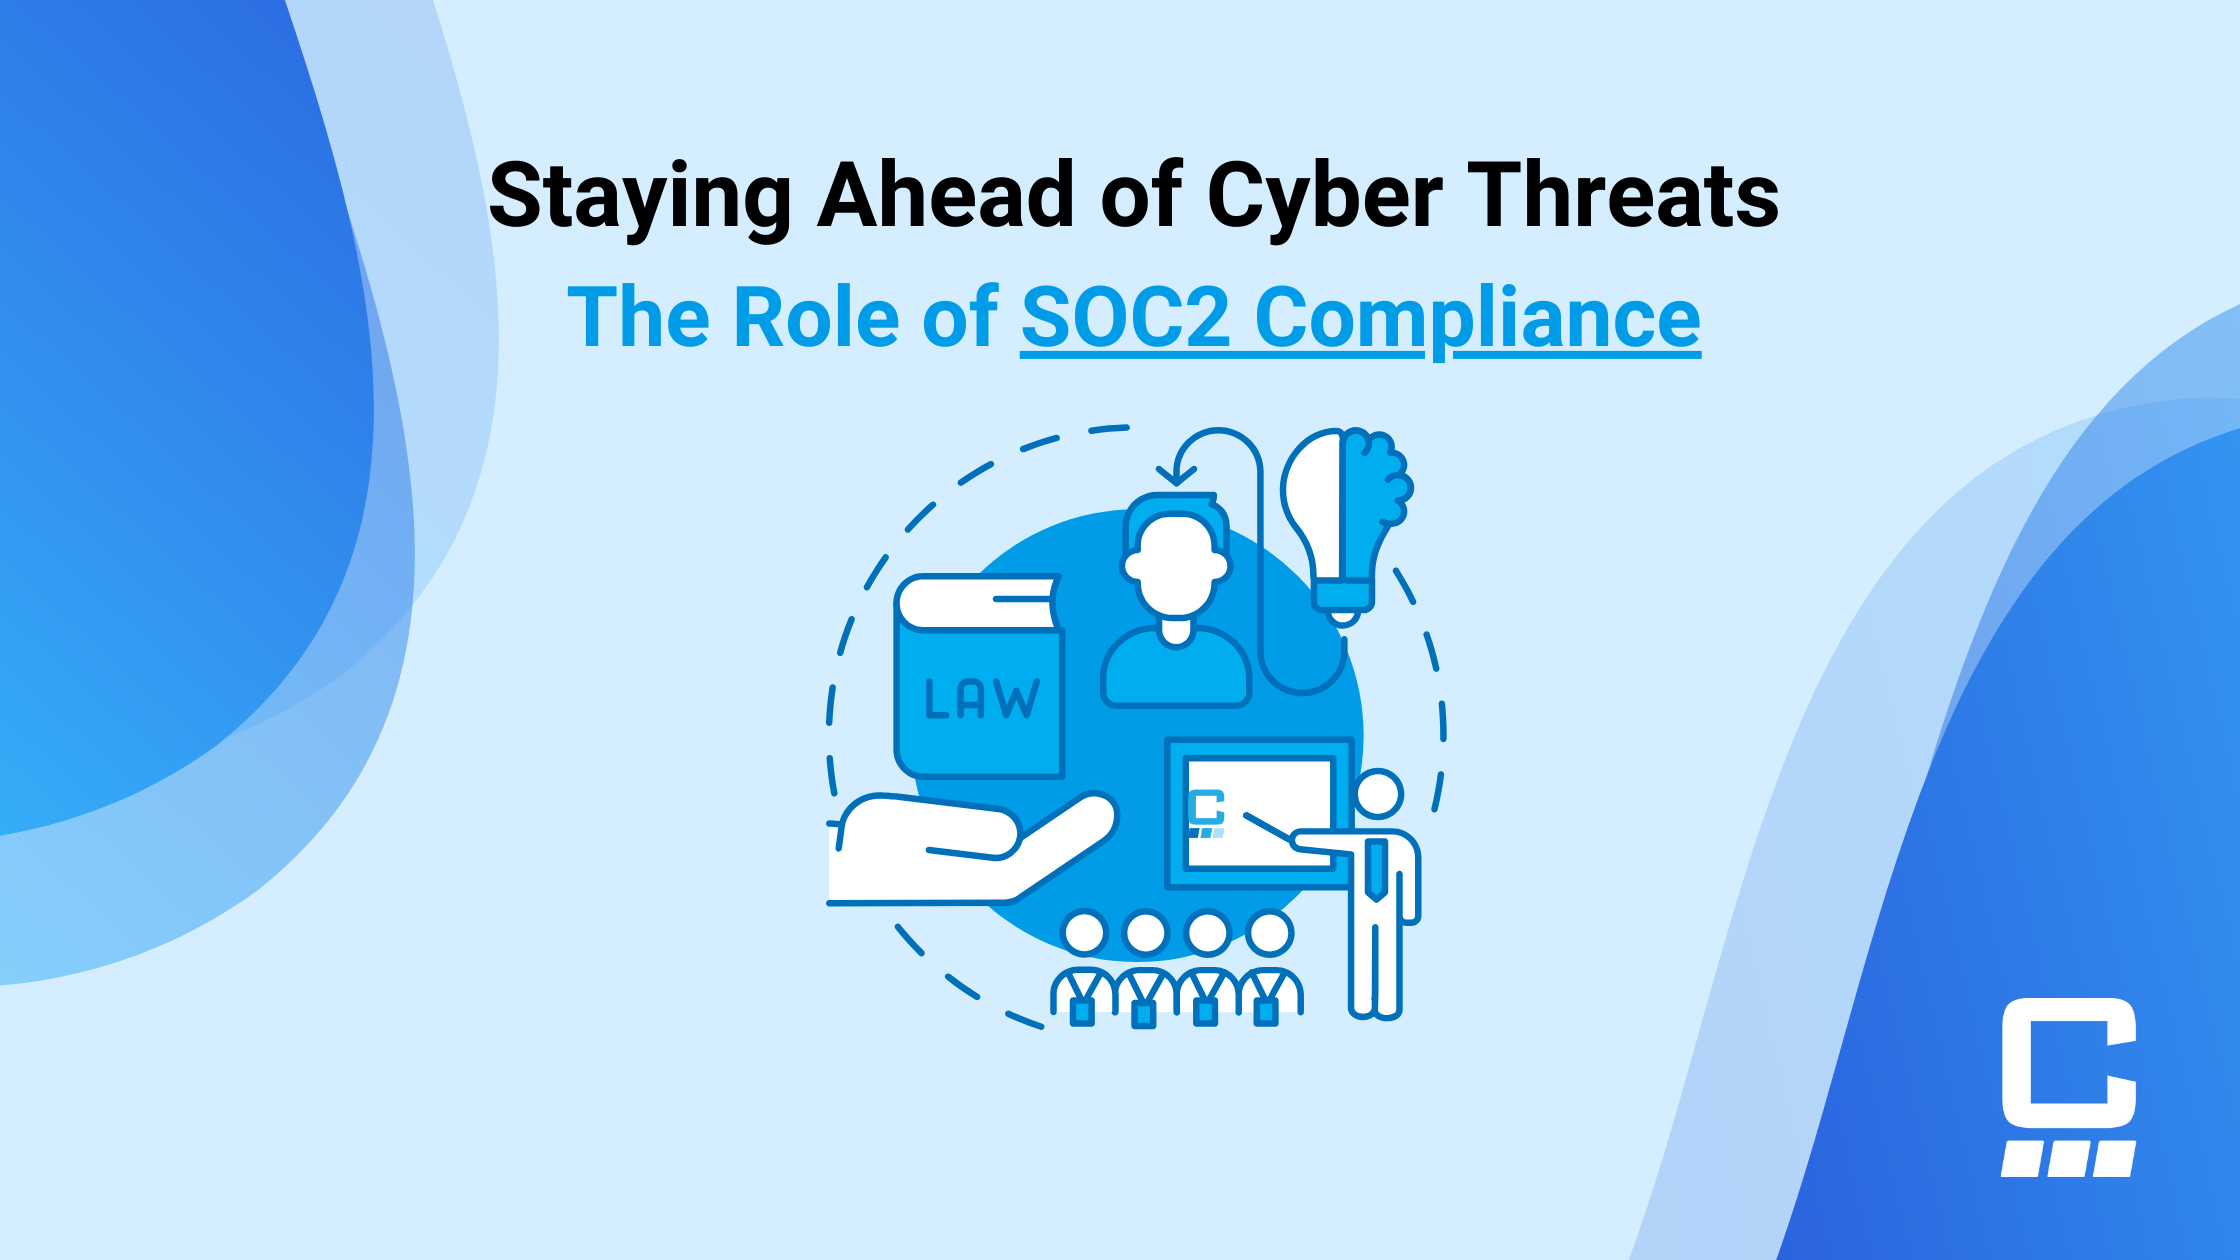 Staying Ahead of Cyber Threats: The Role of SOC2 Compliance